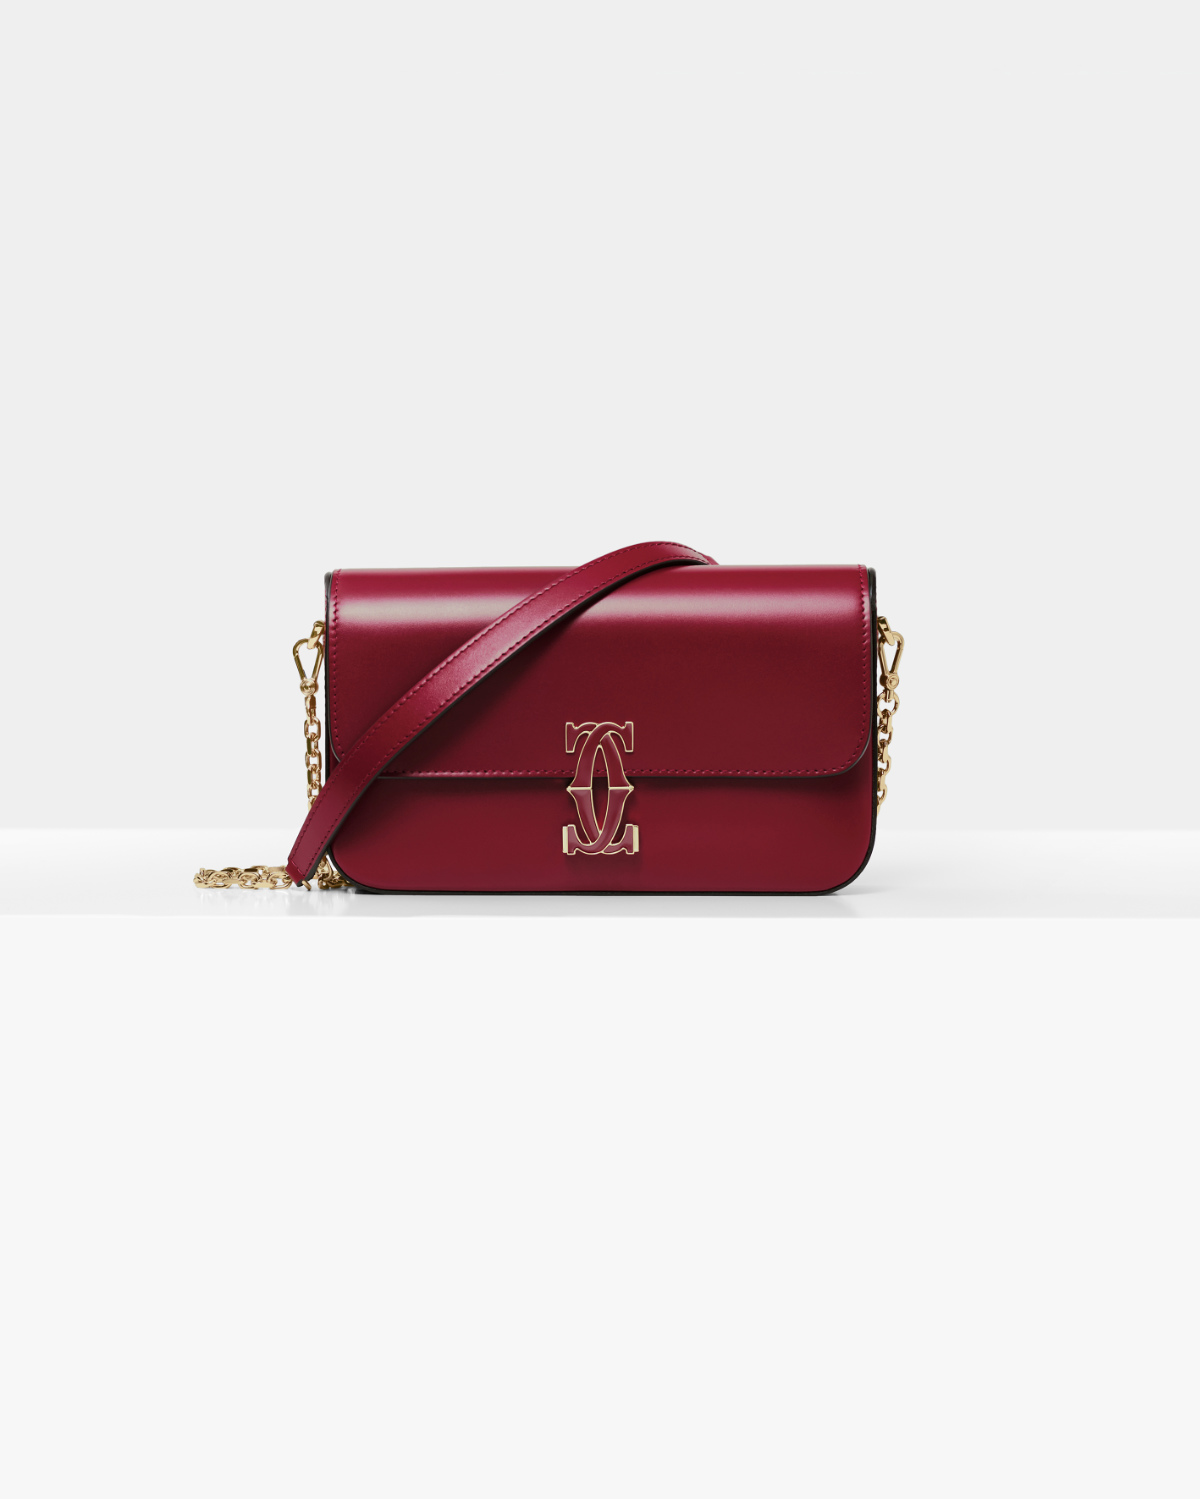 The Double C de Cartier bag established as a timeless classic from the  start - Harmonies Magazine